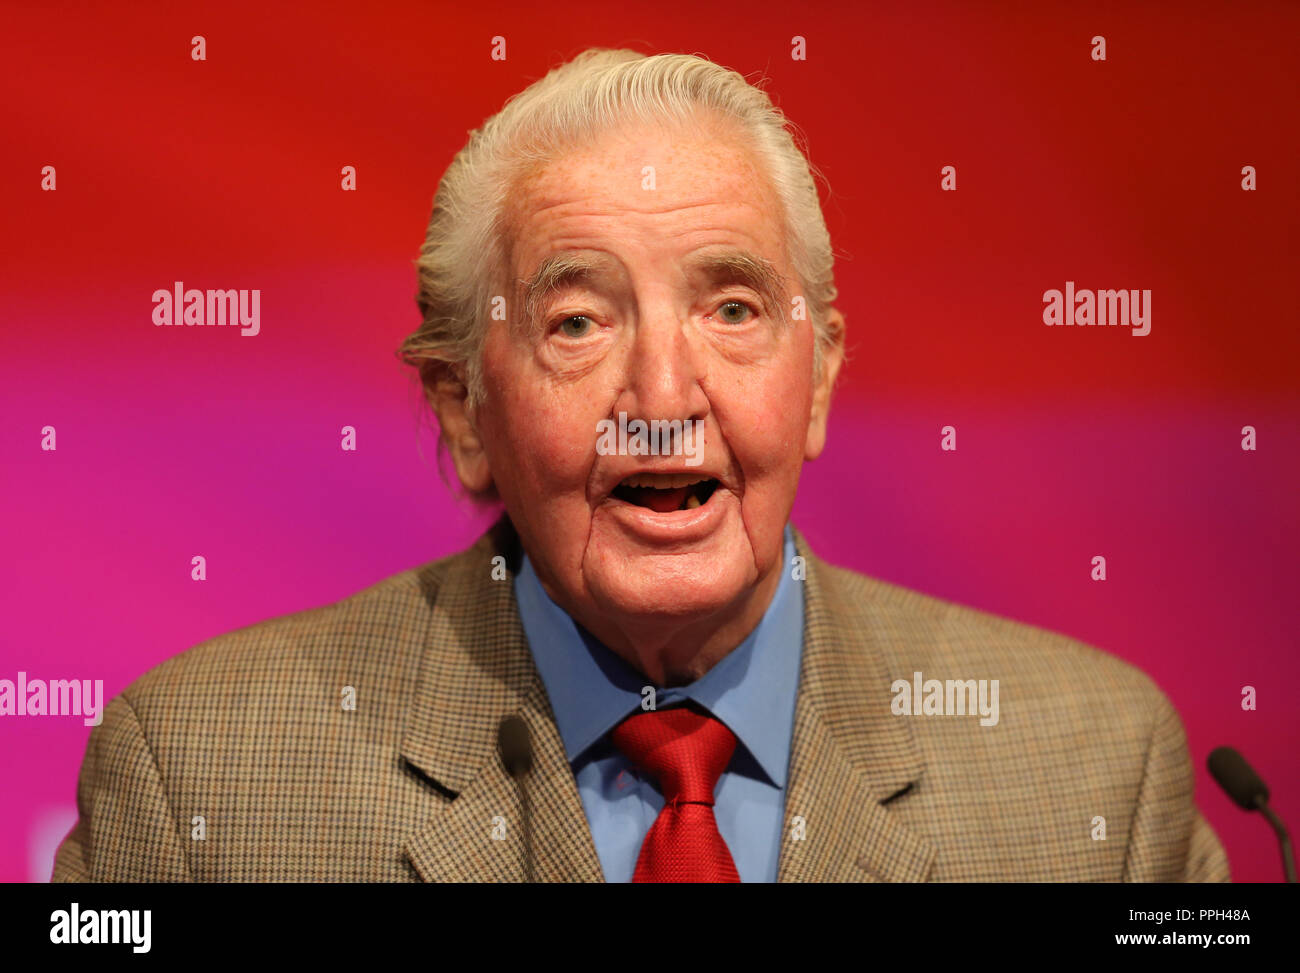 DENNIS SKINNER MP  LABOUR PARTY  LABOUR PARTY CONFERENCE 2018  THE LIVERPOOL ECHO ARENA, LIVERPOOL, , ENGLAND  26 September 2018  DIE18351     ADDRESSES THE LABOUR PARTY CONFERENCE 2018 AT THE LIVERPOOL ECHO ARENA, LIVERPOOL, ENGLAND Stock Photo